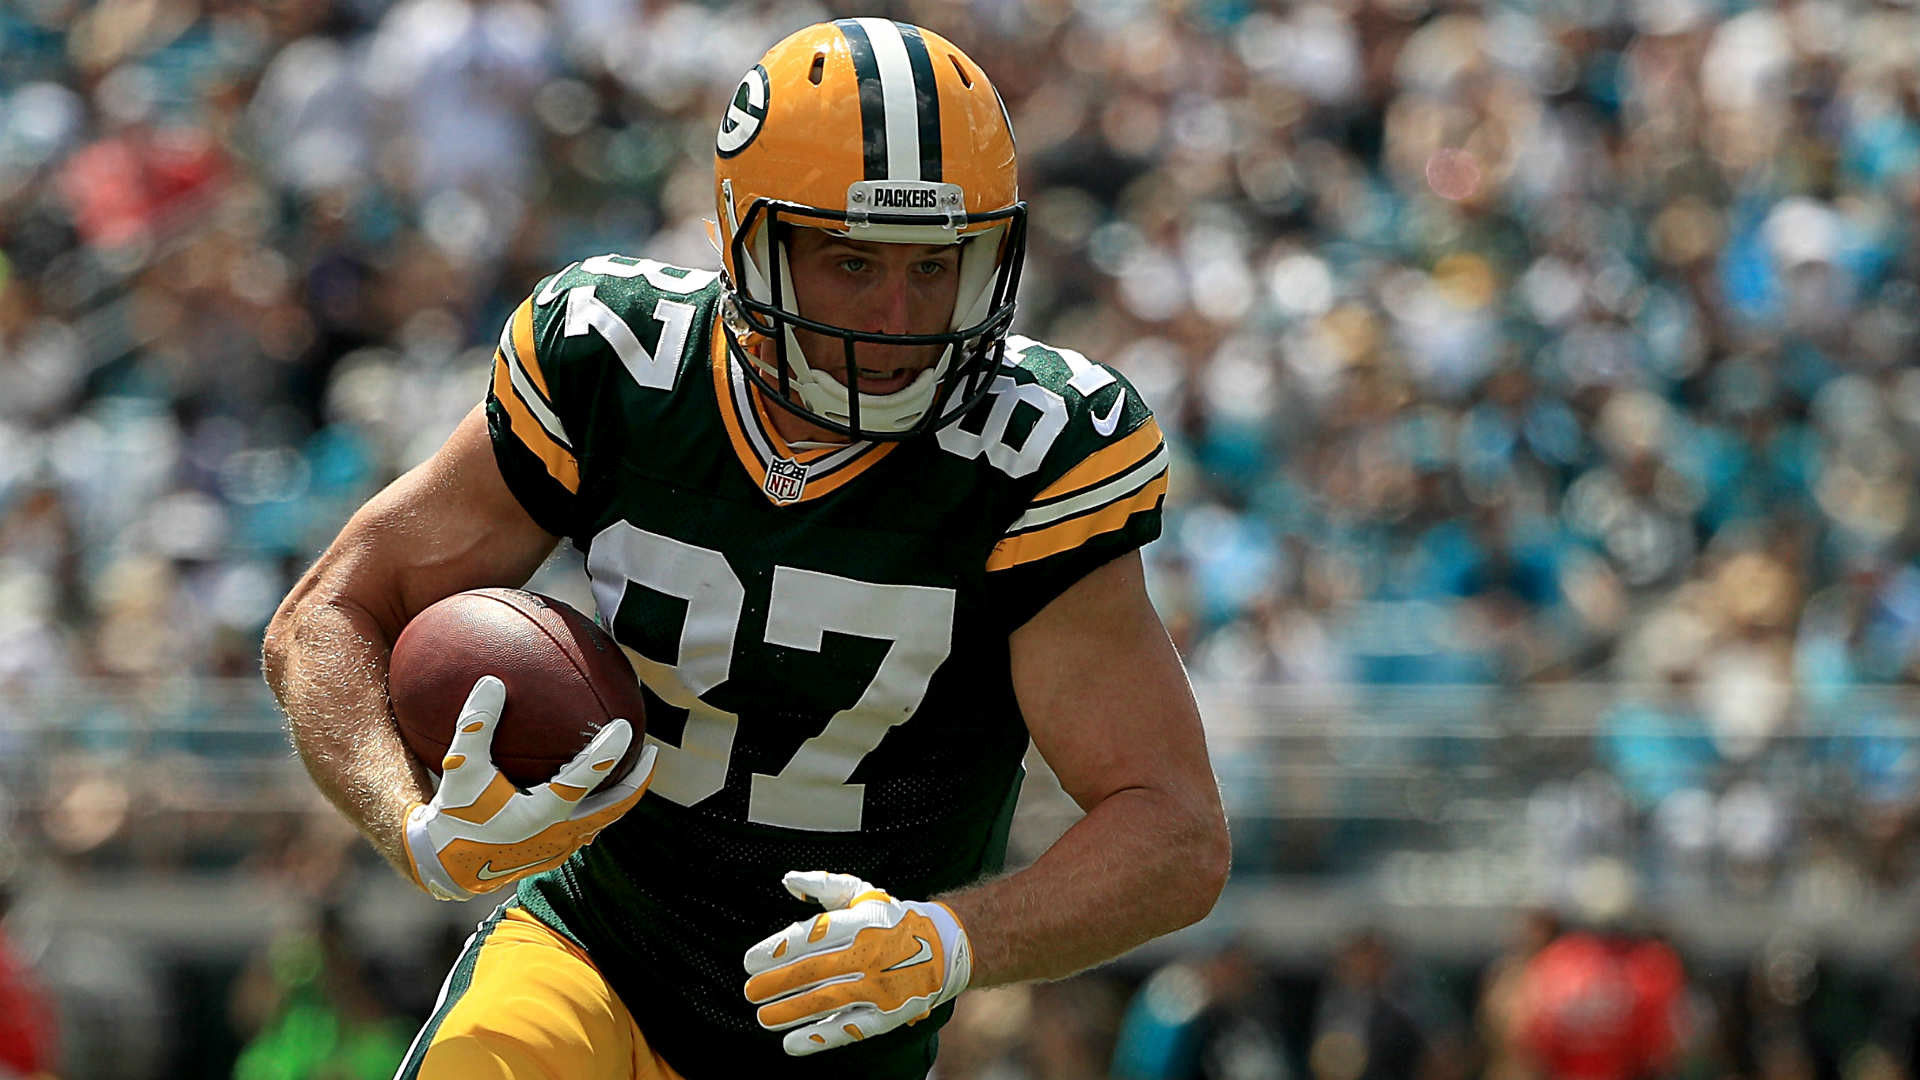 1920x1080 Jordy Nelson returns to help Packers beat Jaguars | NFL | Sporting News